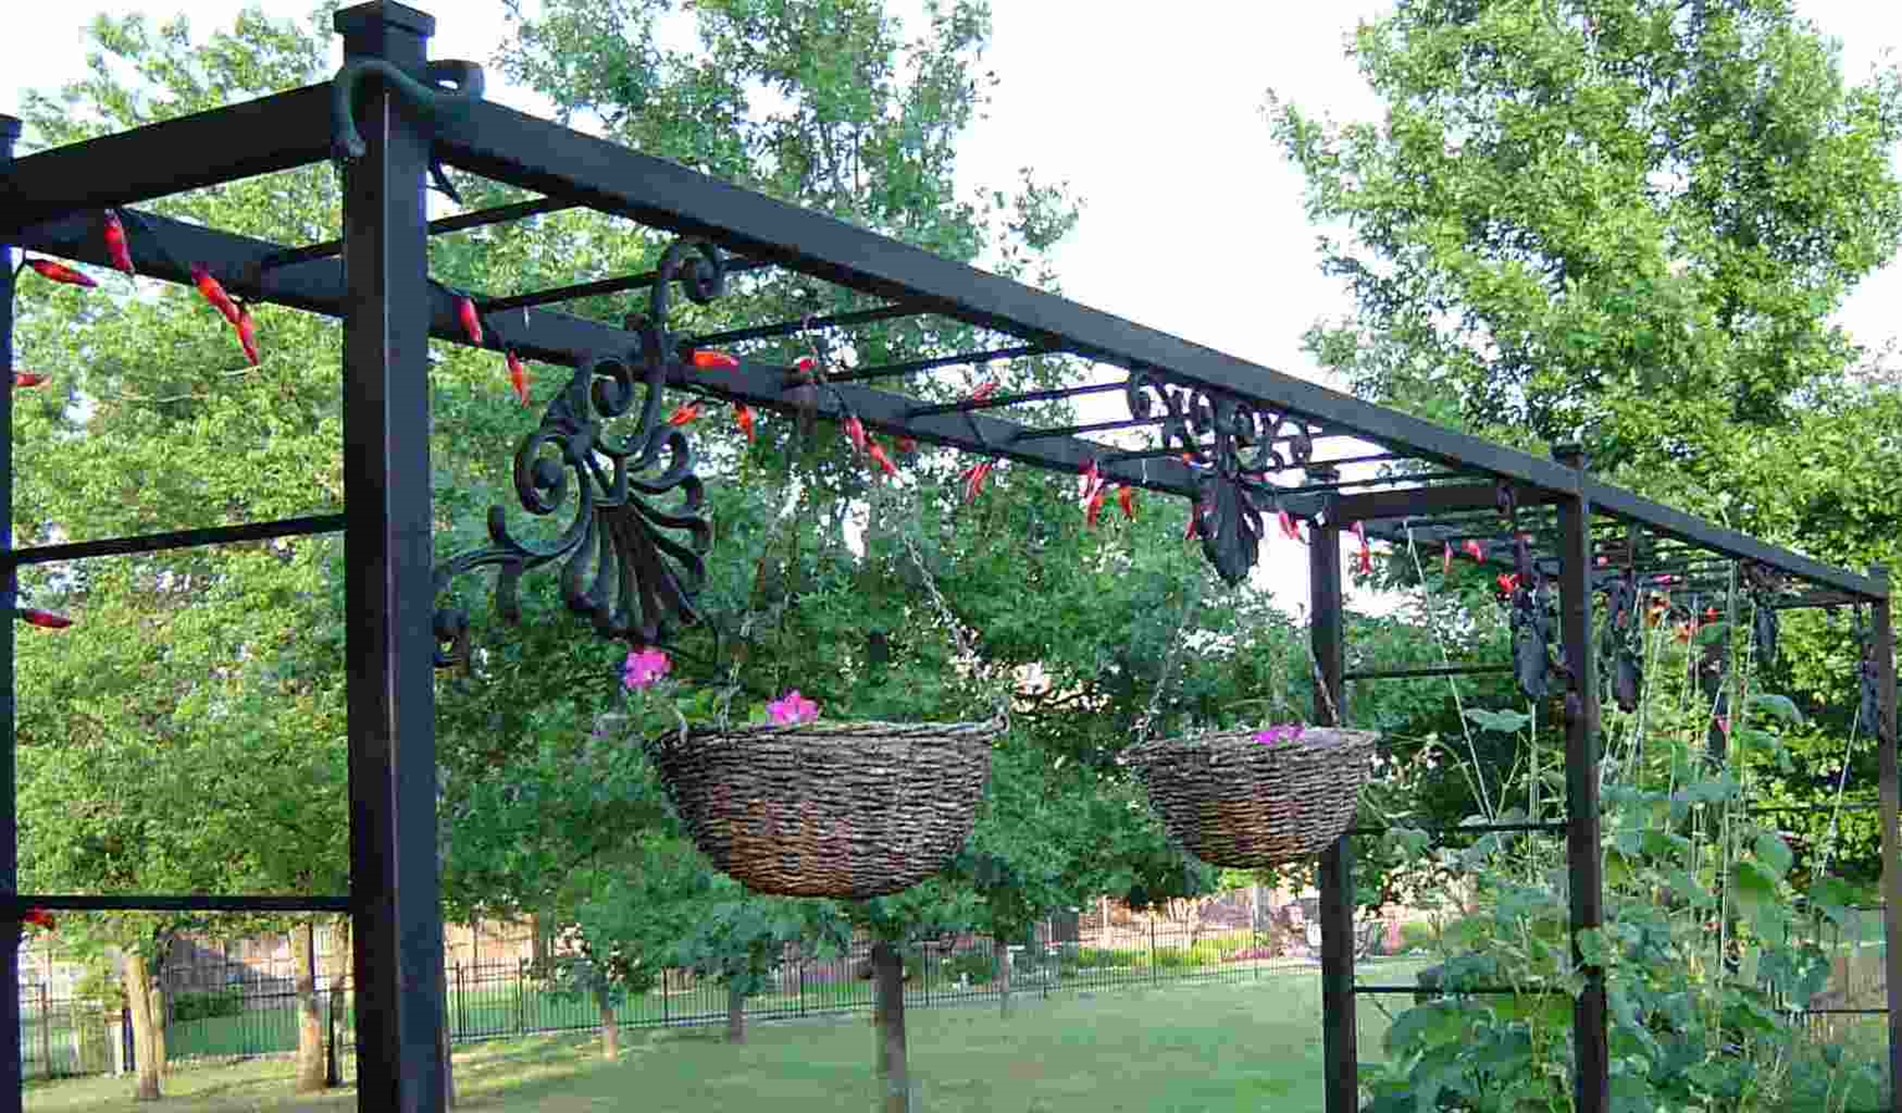 A Gorgeous Trellis with Flower Baskets